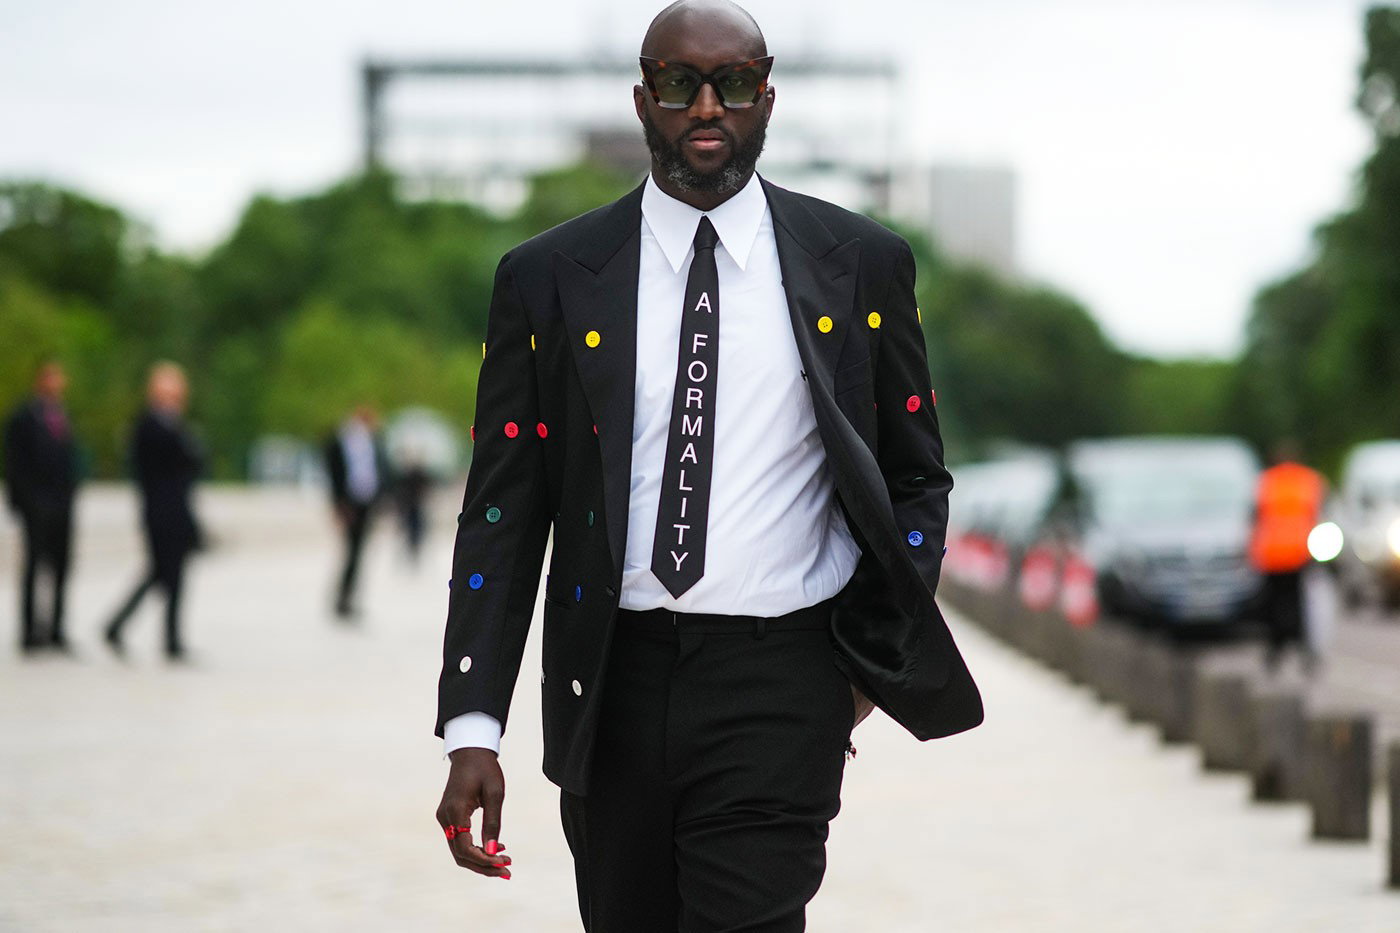 HYPEBEAST on X: Here's a closer look at @virgilabloh's new fiber